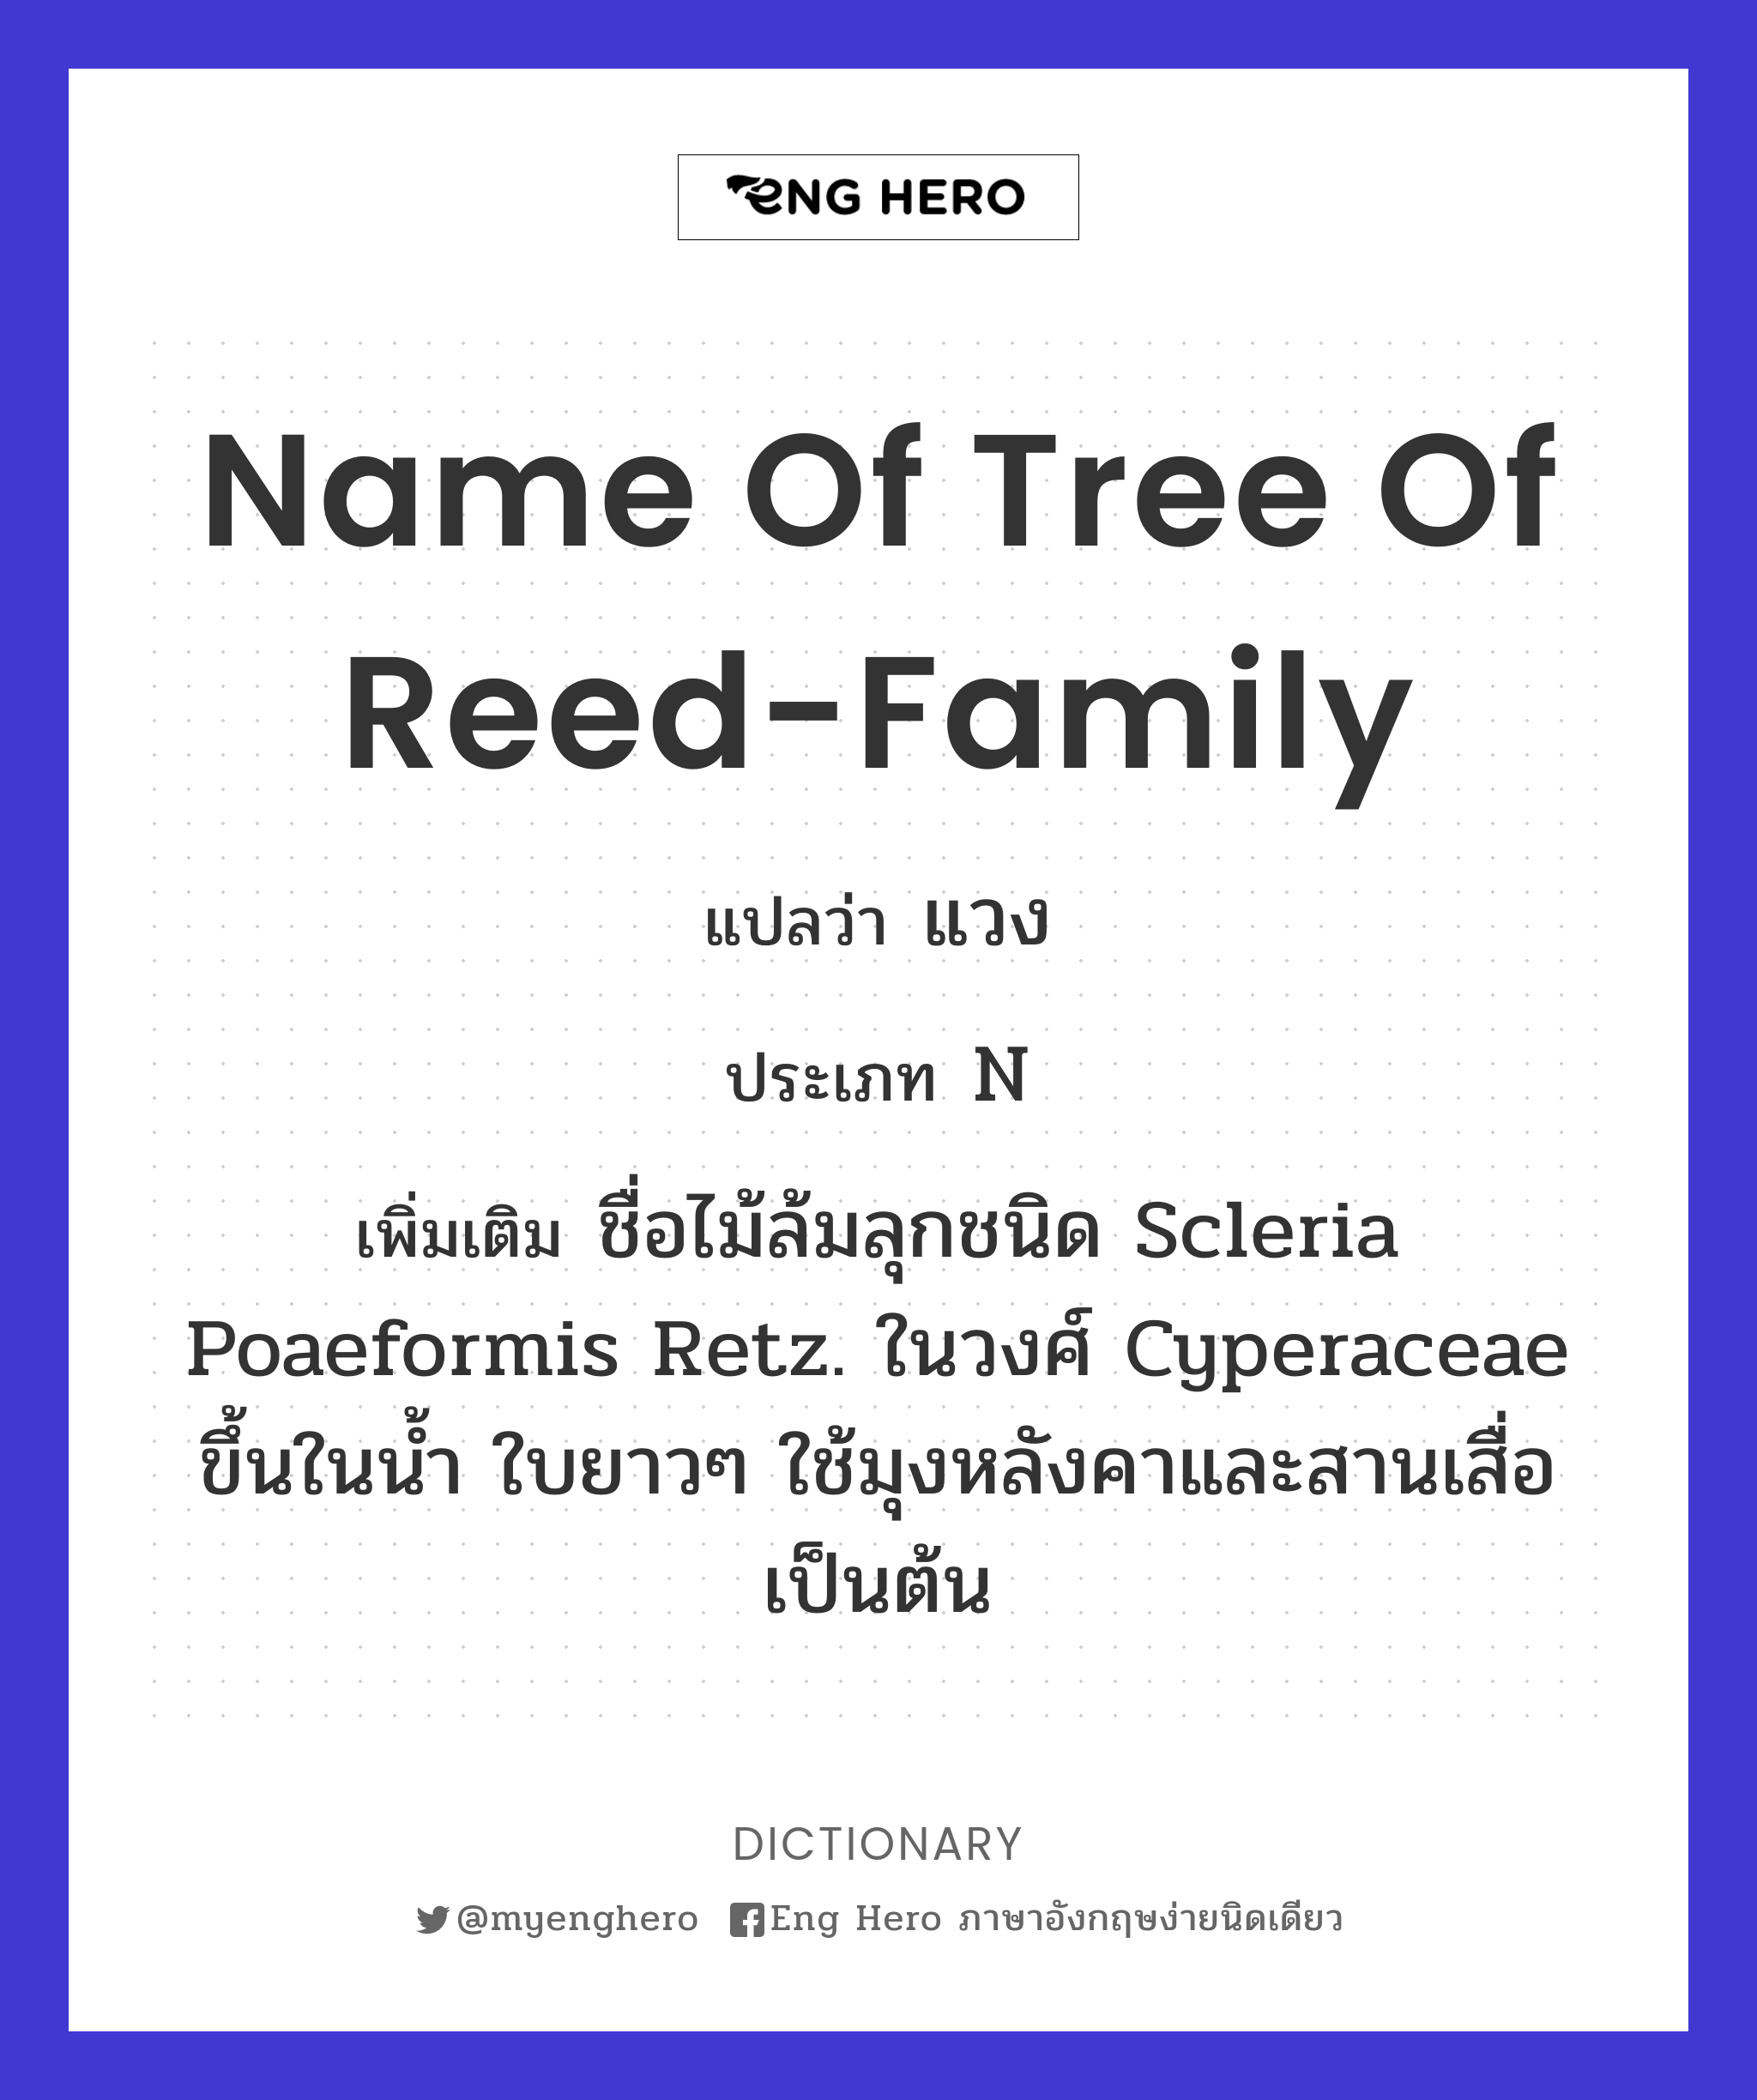 name of tree of reed-family